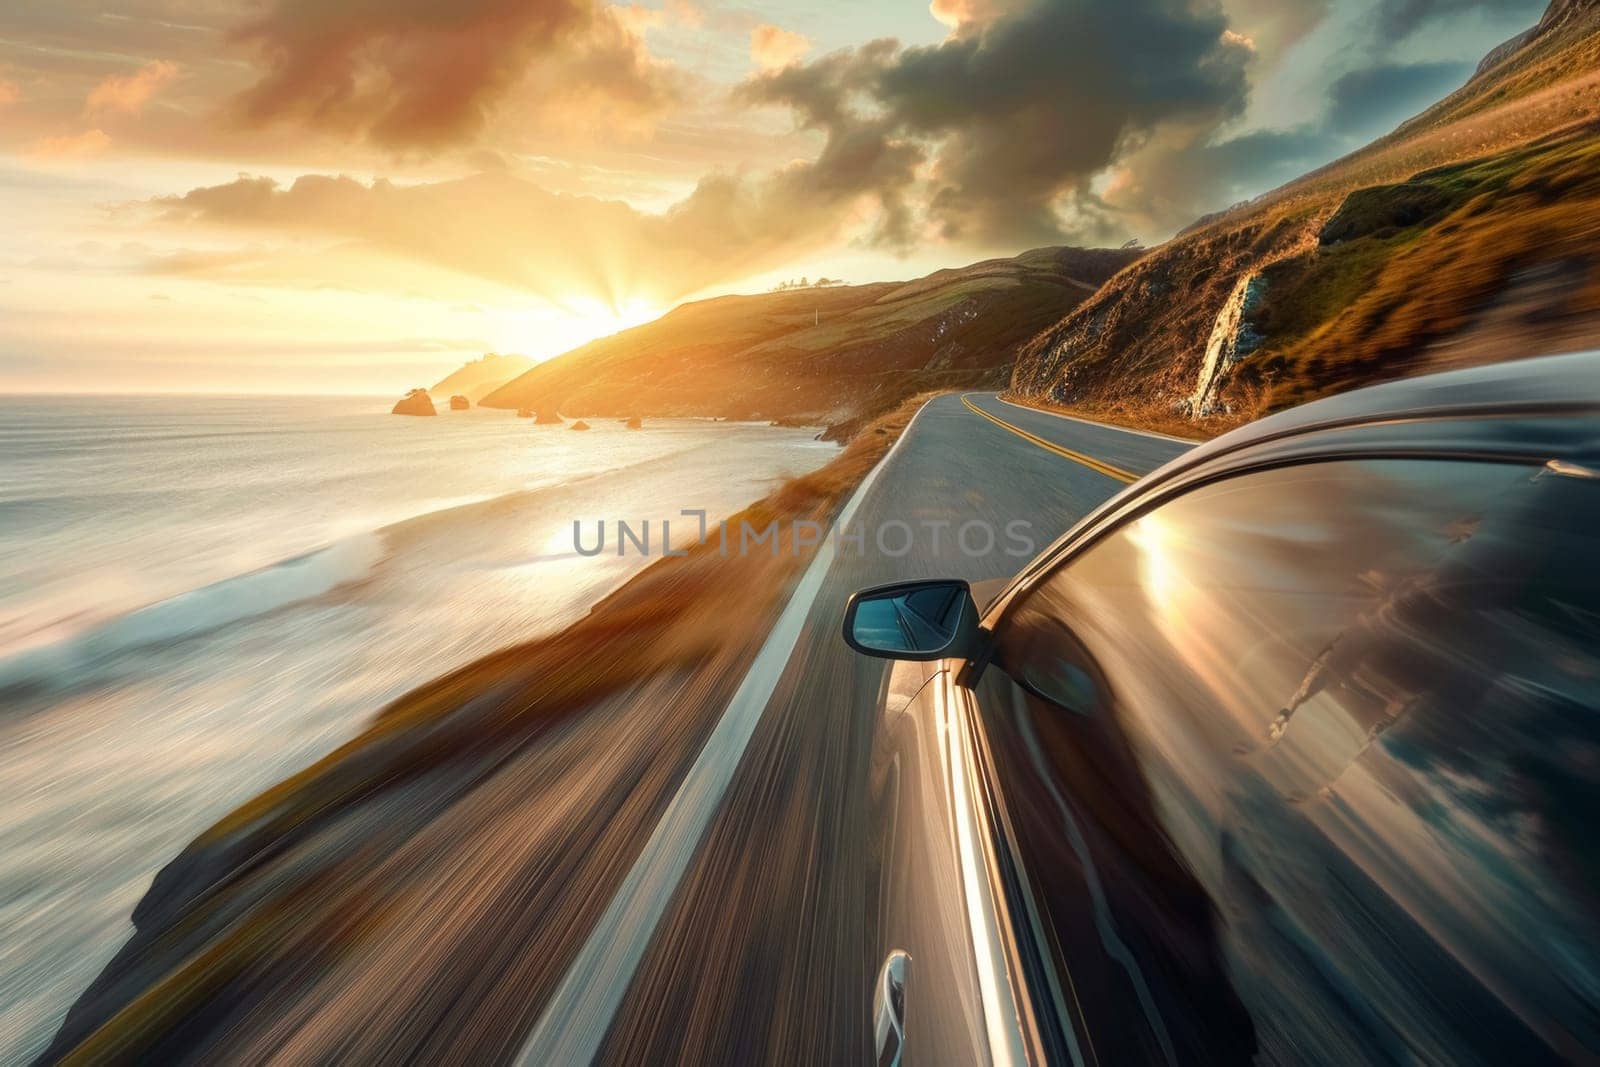 A convertible car racing along a beautiful coastal route, the golden hour sun casting warm light on an open road trip